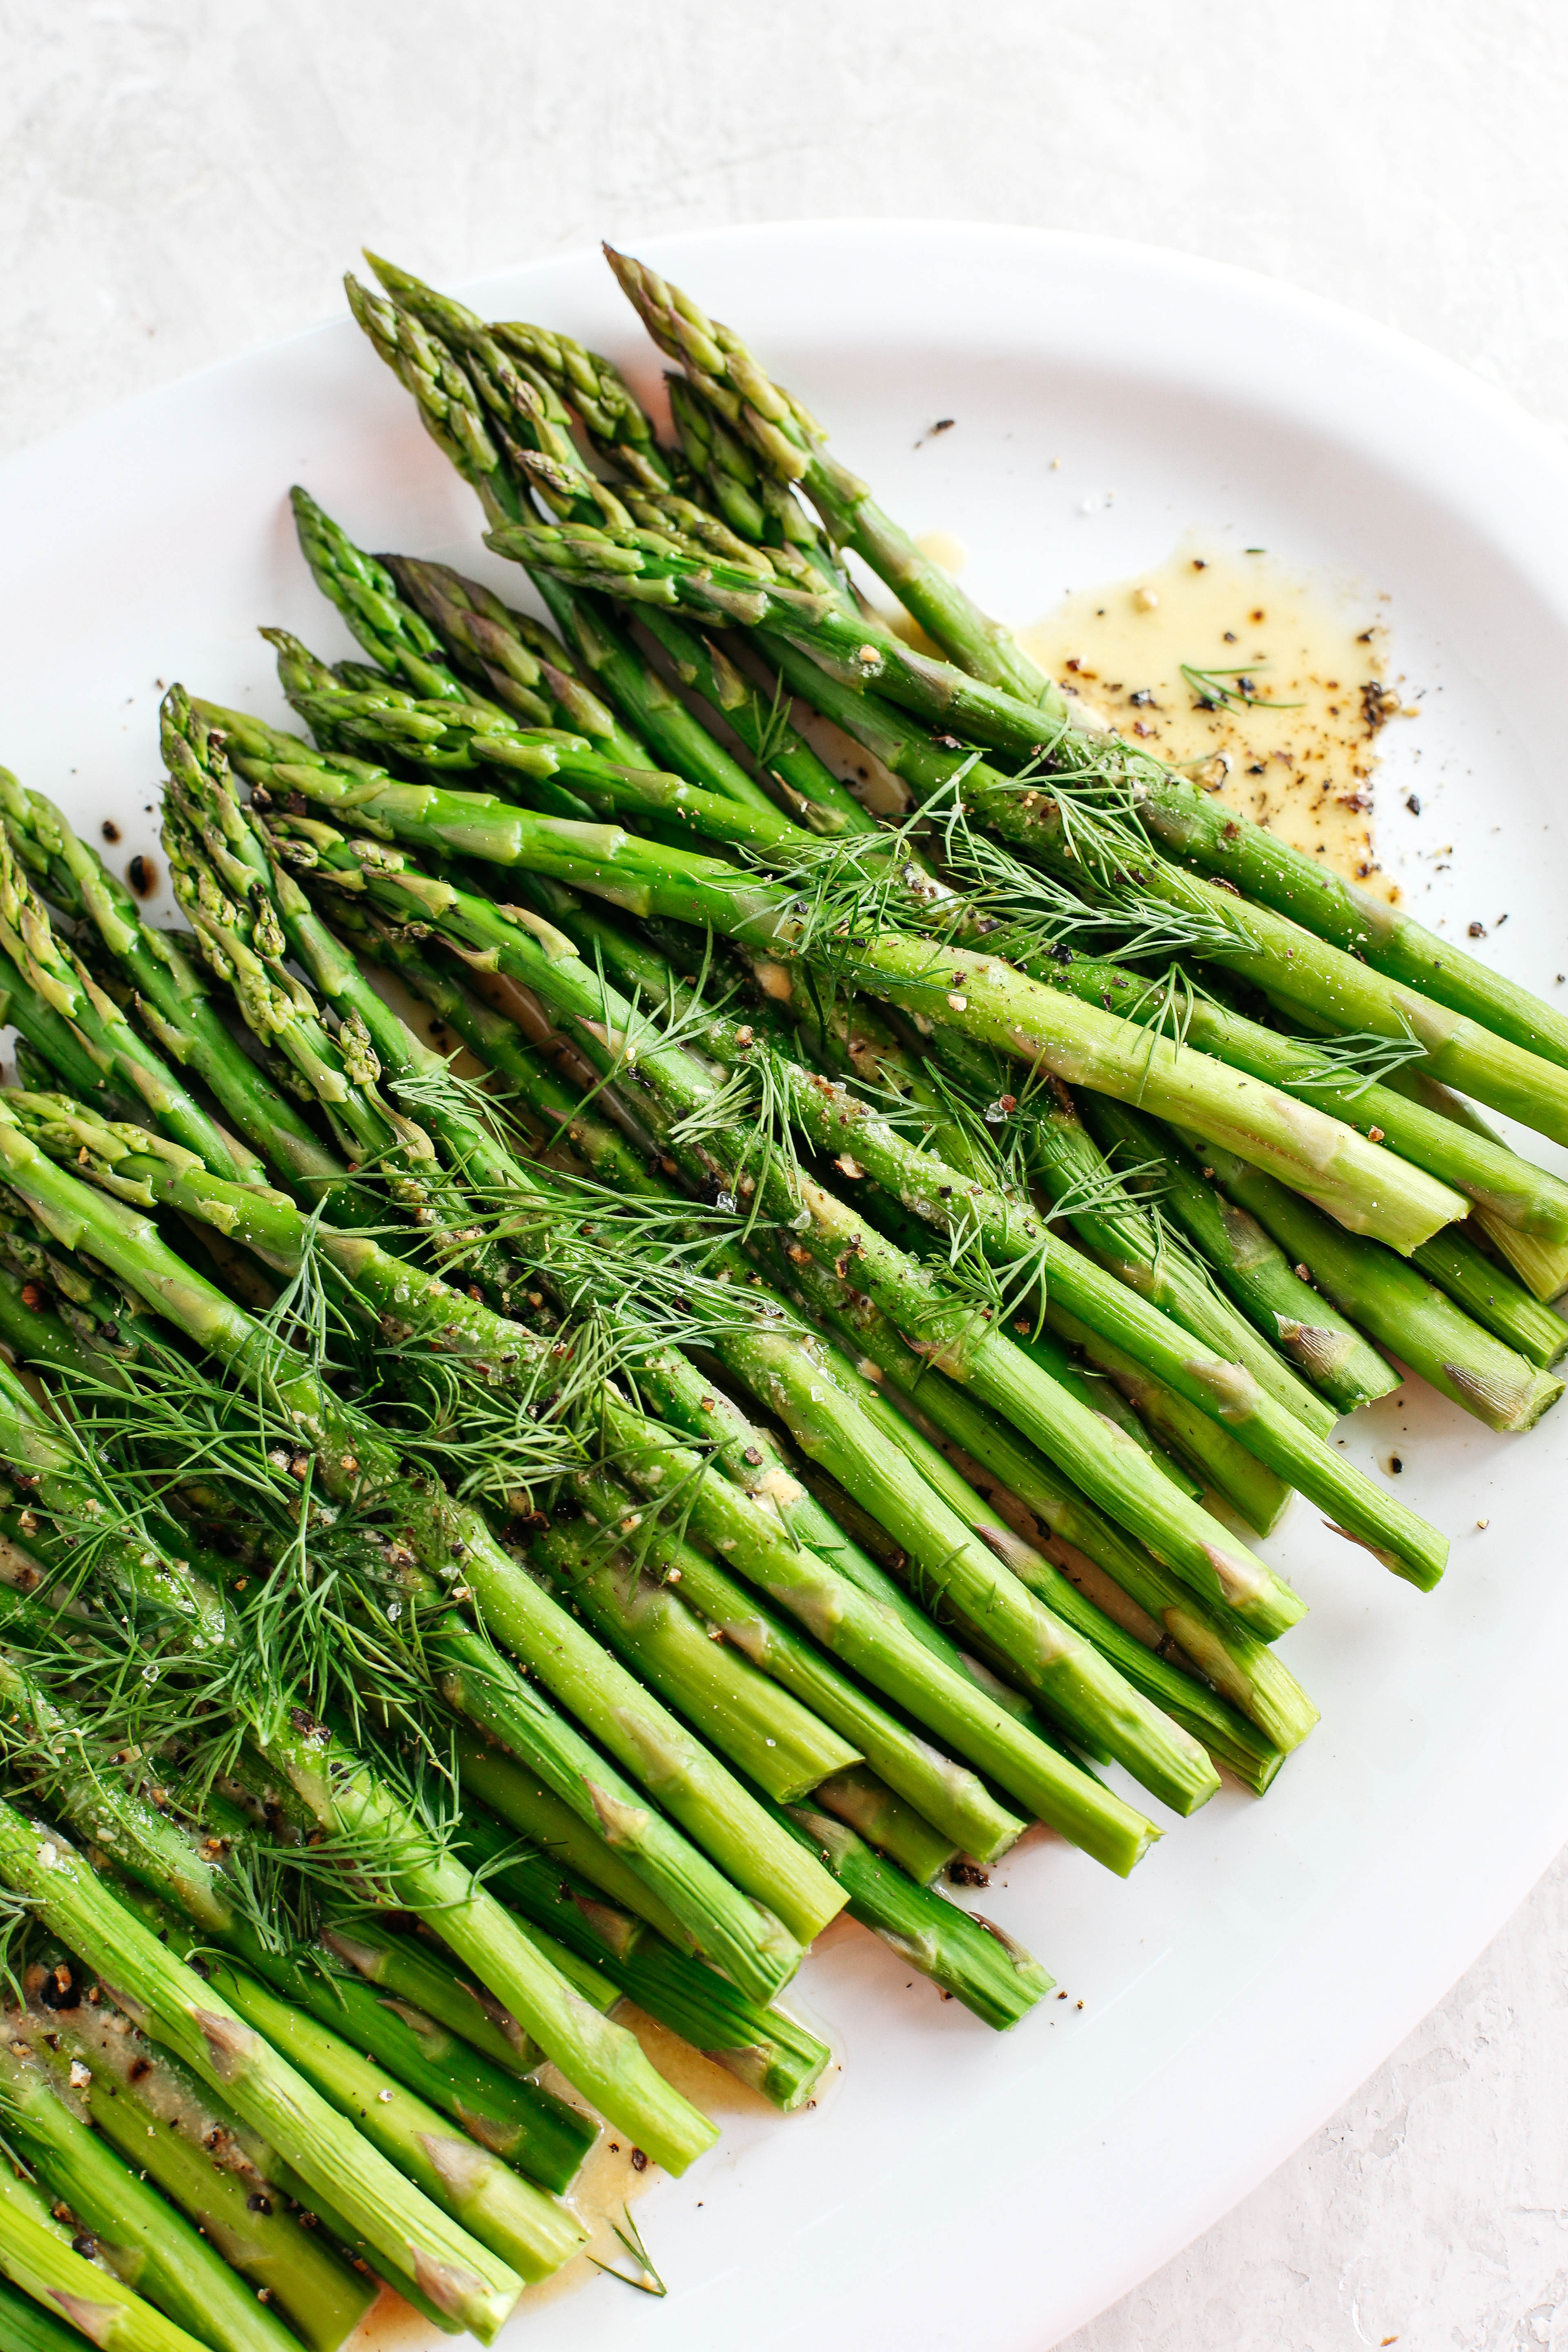 Baked Asparagus with delicious Mustard Dill Sauce makes the perfect healthy side dish for any meal with just a few simple ingredients! 